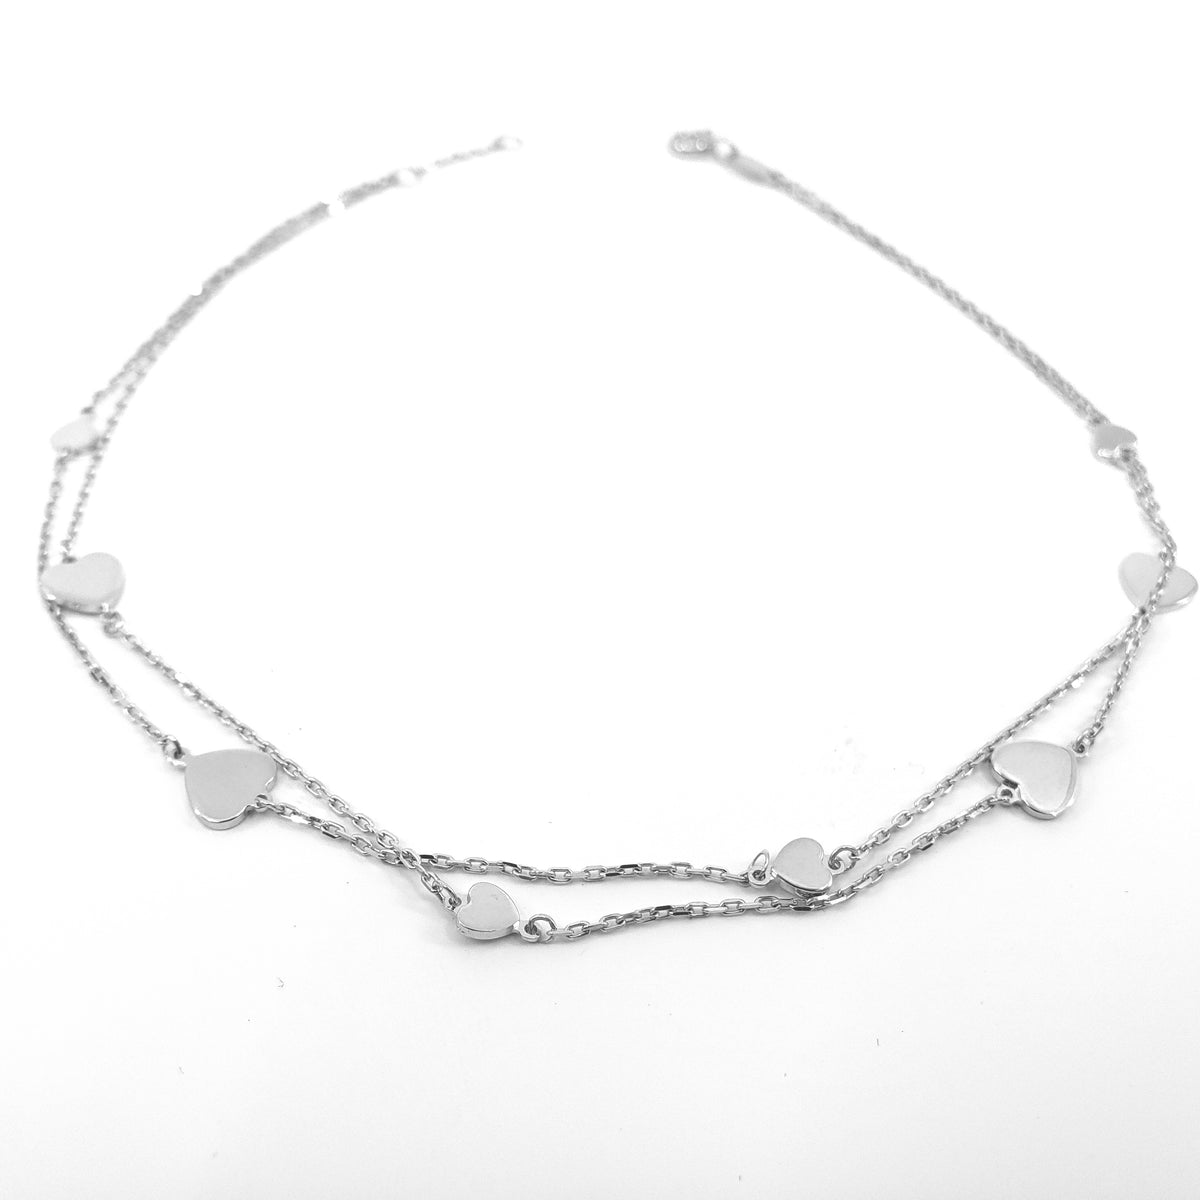 10K White Gold Hearts Double Link Anklet with 0.5 Inch Adjuster - 10 Inches